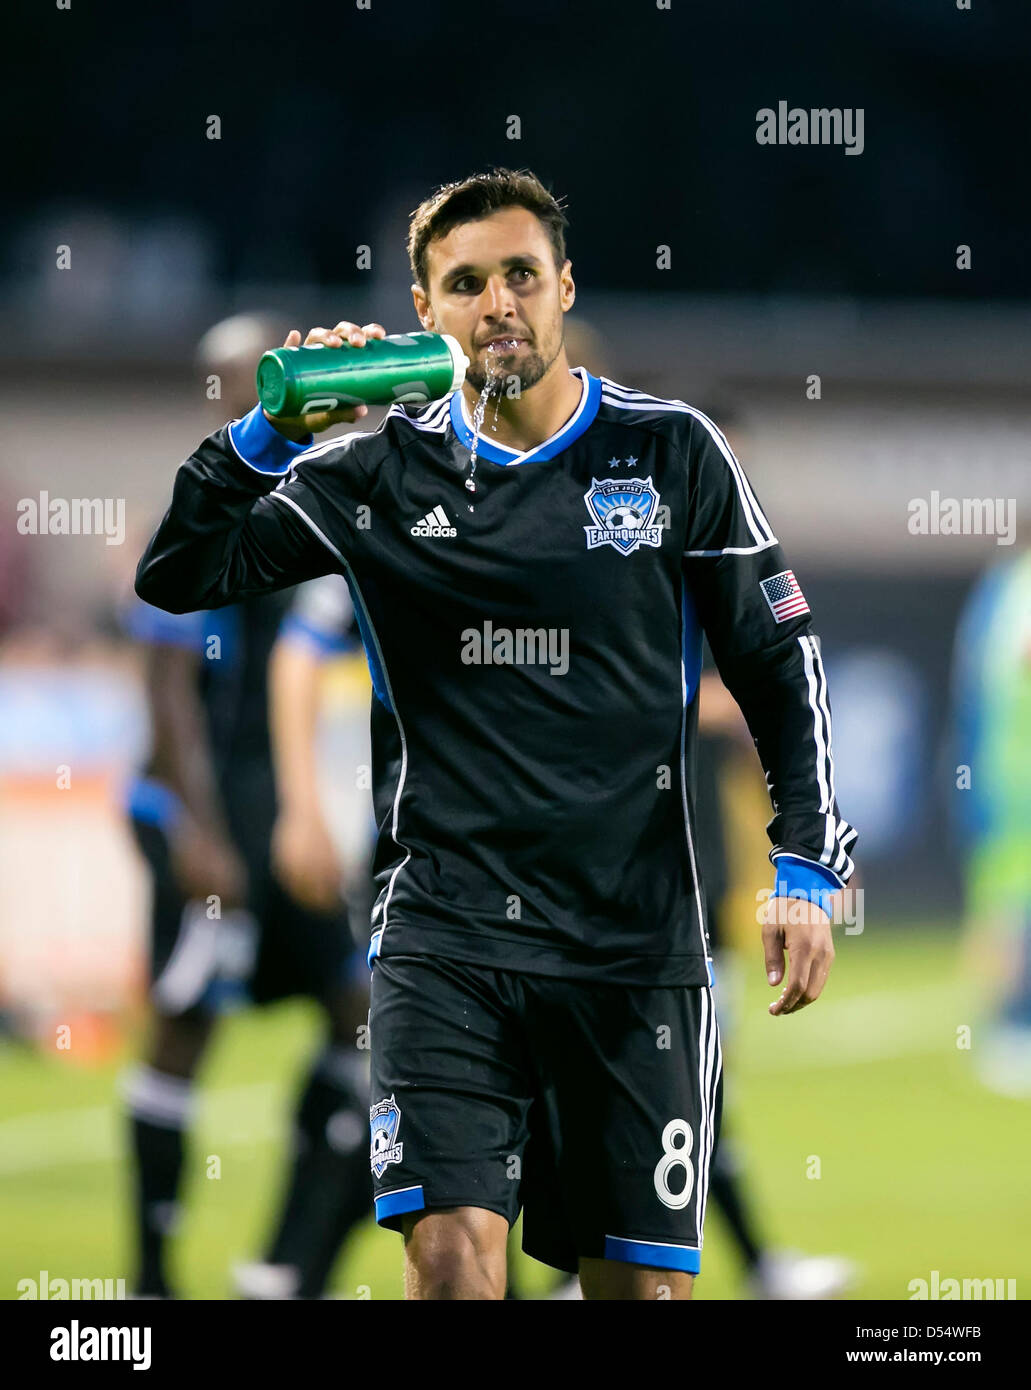 Santa Clara, California, USA. 23rd March 2013. San Jose Earthquakes forward Chris Wondolowski (8) spits out a spray of water just prior to the the MLS game between the Seattle Sounders and the San Jose Earthquakes at Buck Shaw Stadium in Santa Clara CA. San Jose defeated Seattle 1-0. Credit:  Cal Sport Media / Alamy Live News Stock Photo